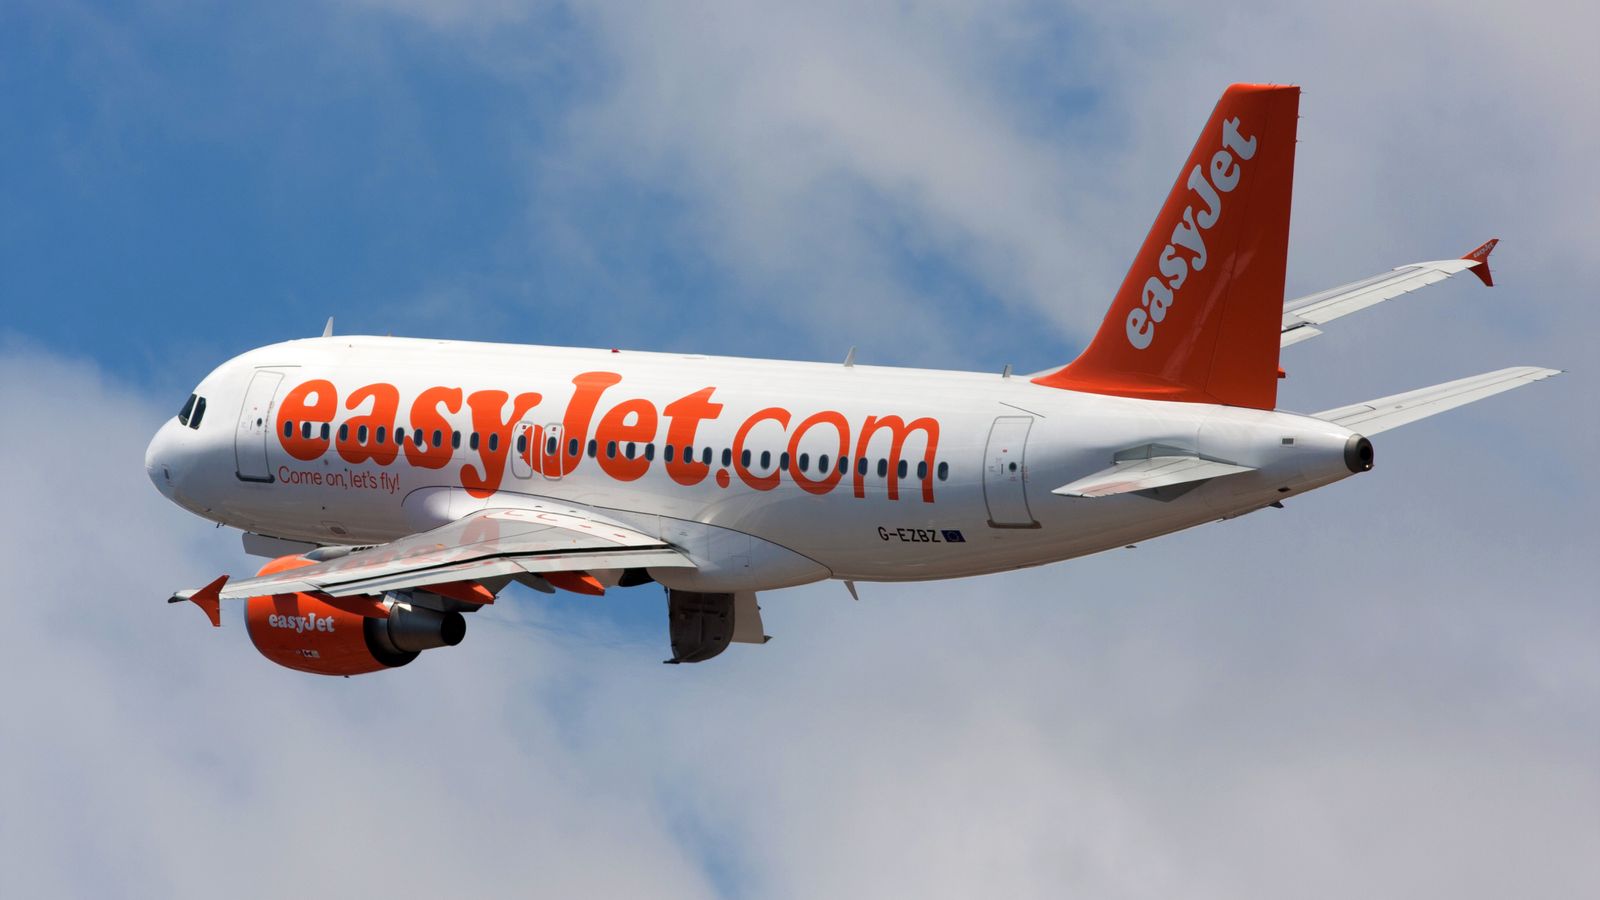 Easyjet and TUI flights cancelled and long queues at some UK airports as passengers face half-term disruption